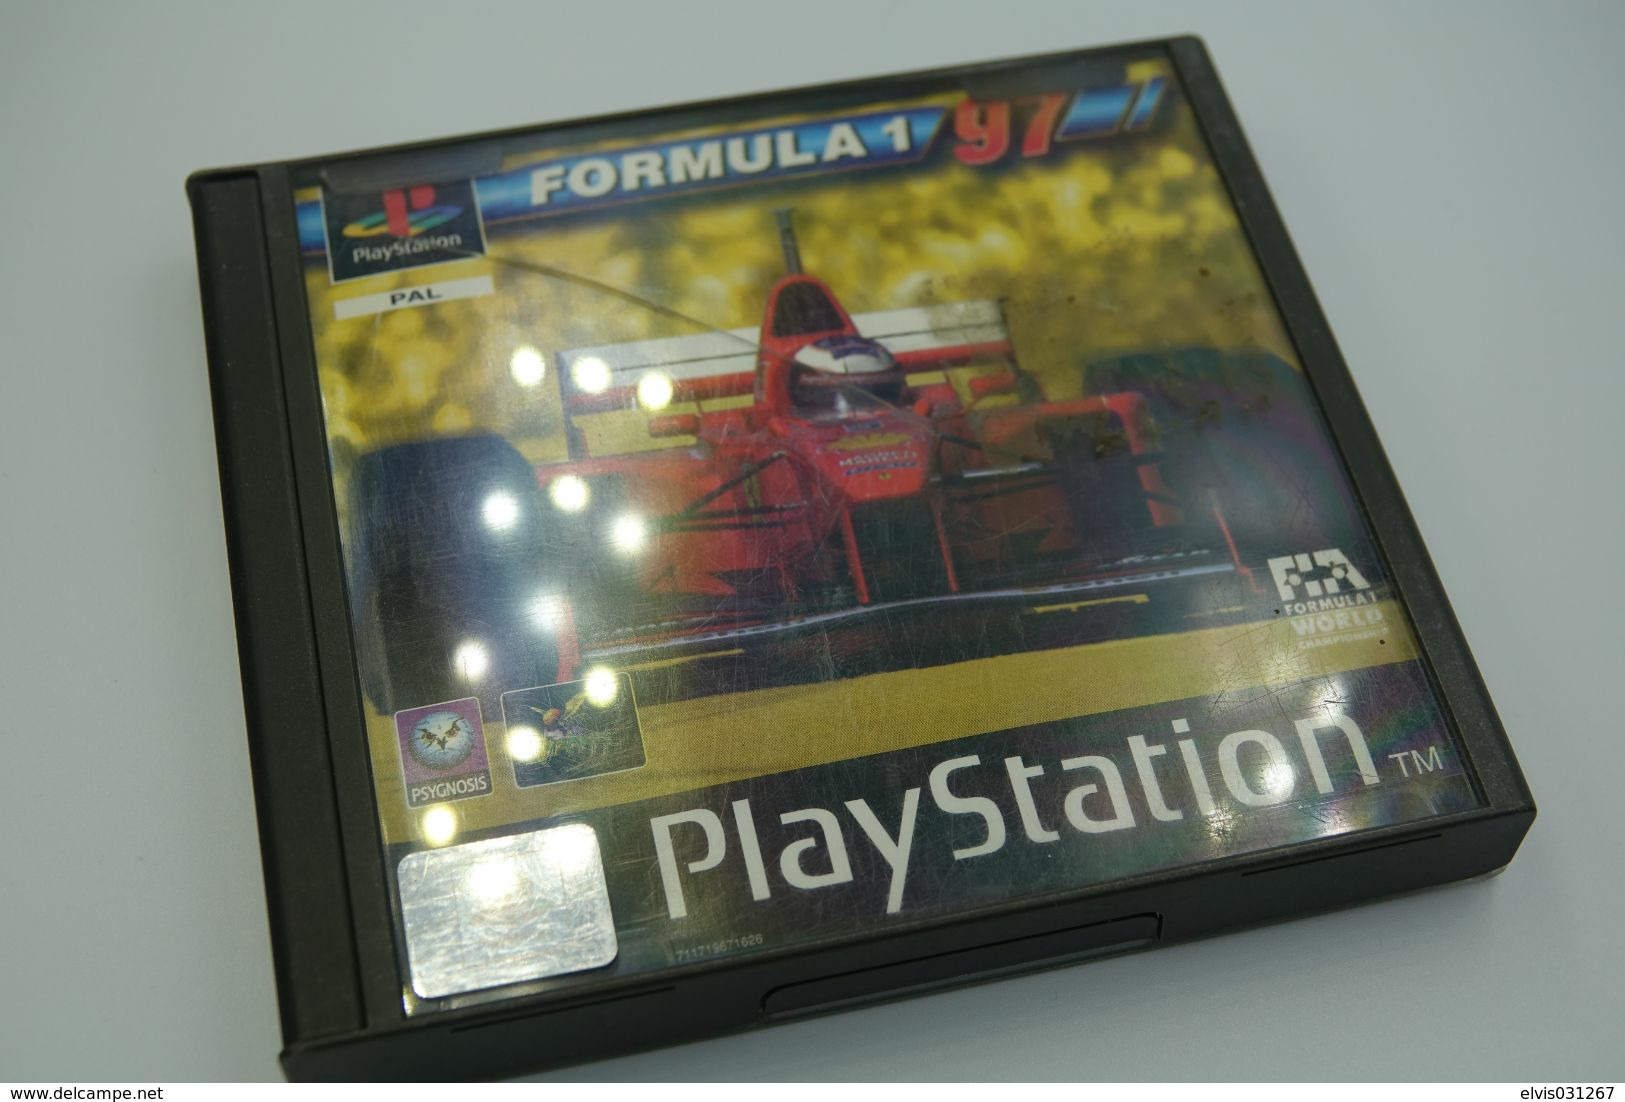 SONY PLAYSTATION ONE PS1 : FORMULA ONE 1997 Officially Licensed Product - Playstation